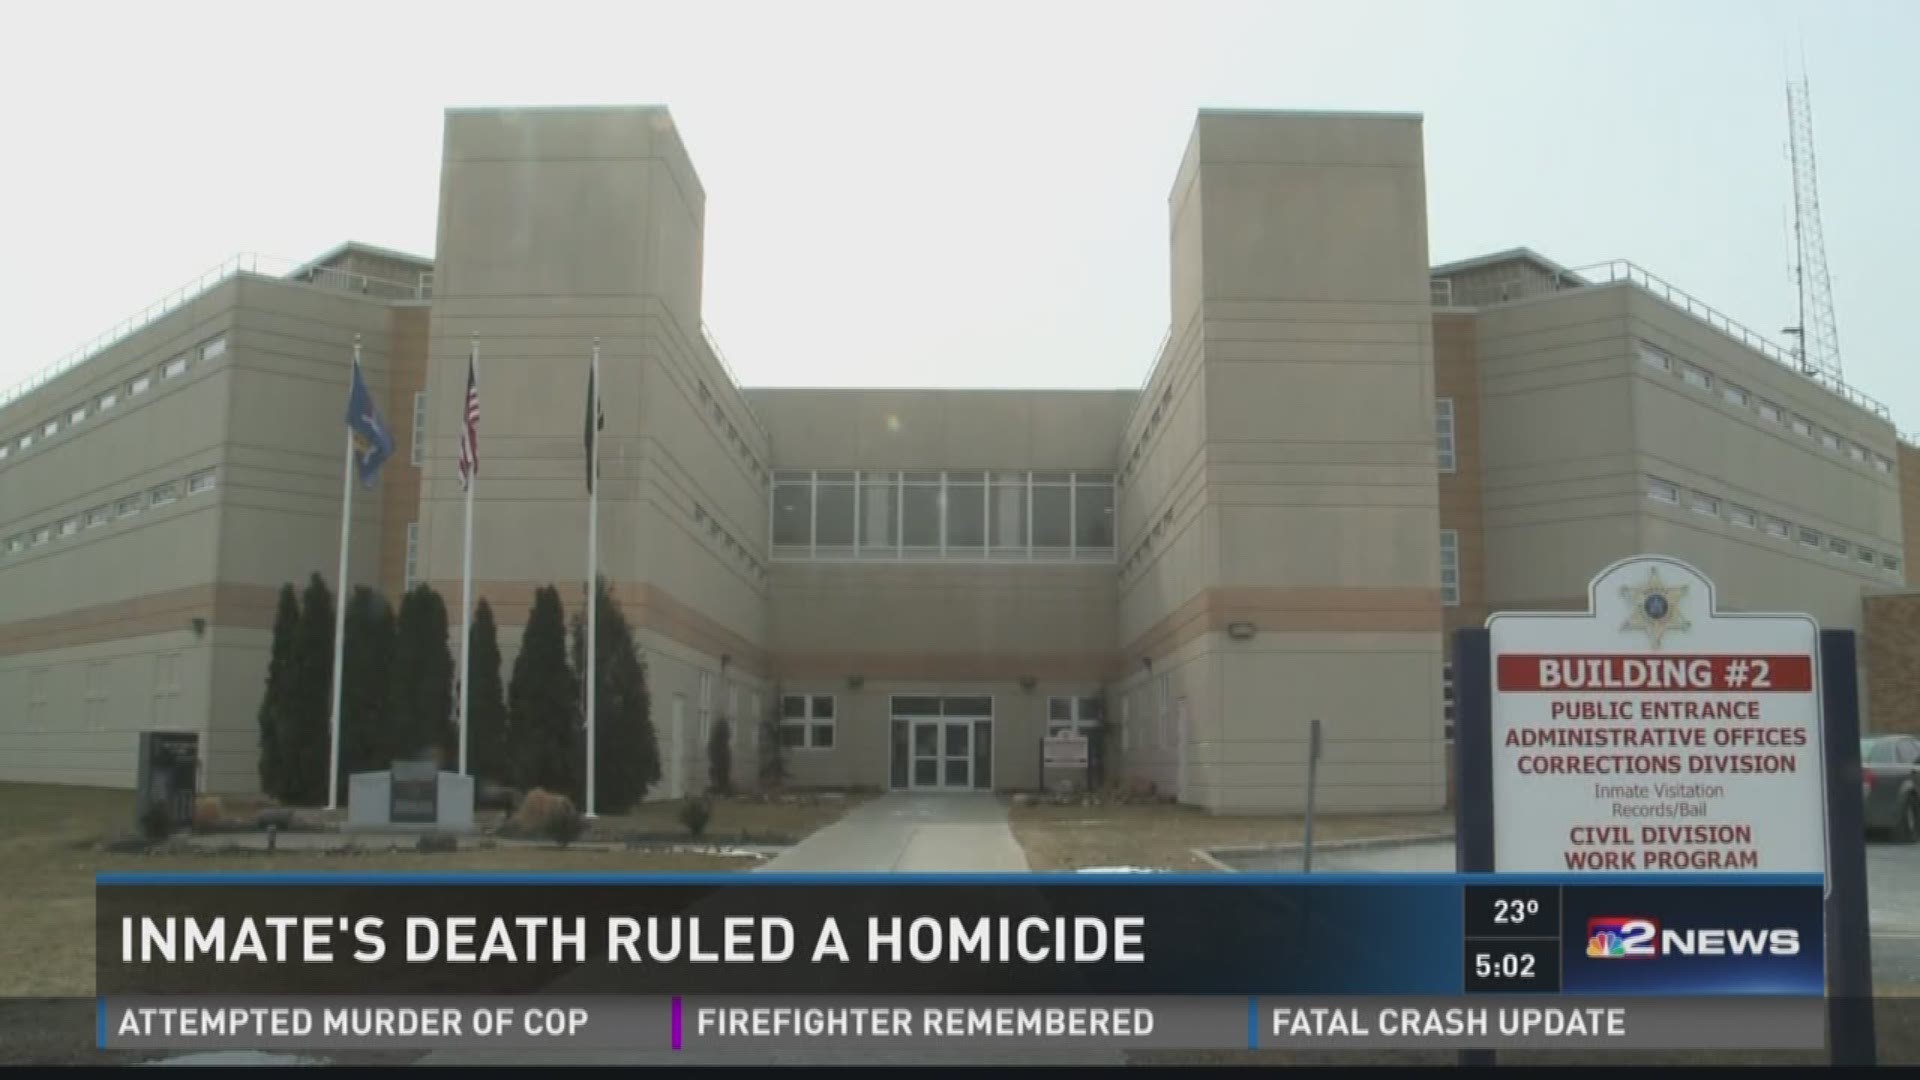 INMATE'S DEATH RULED A HOMICIDE